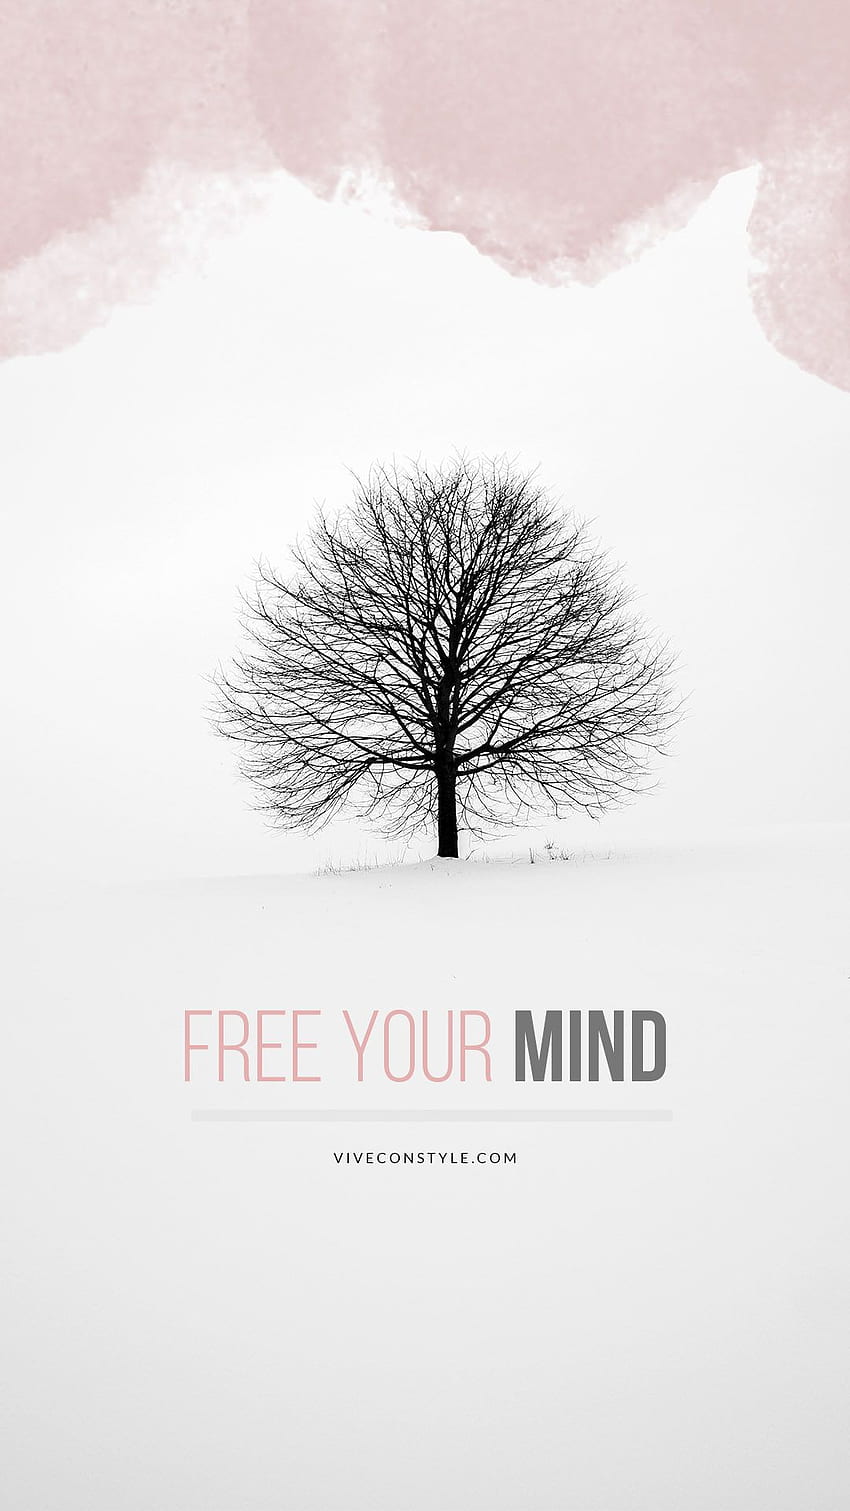 your mind mobile - Vive Con Style, Inspirational HD phone wallpaper